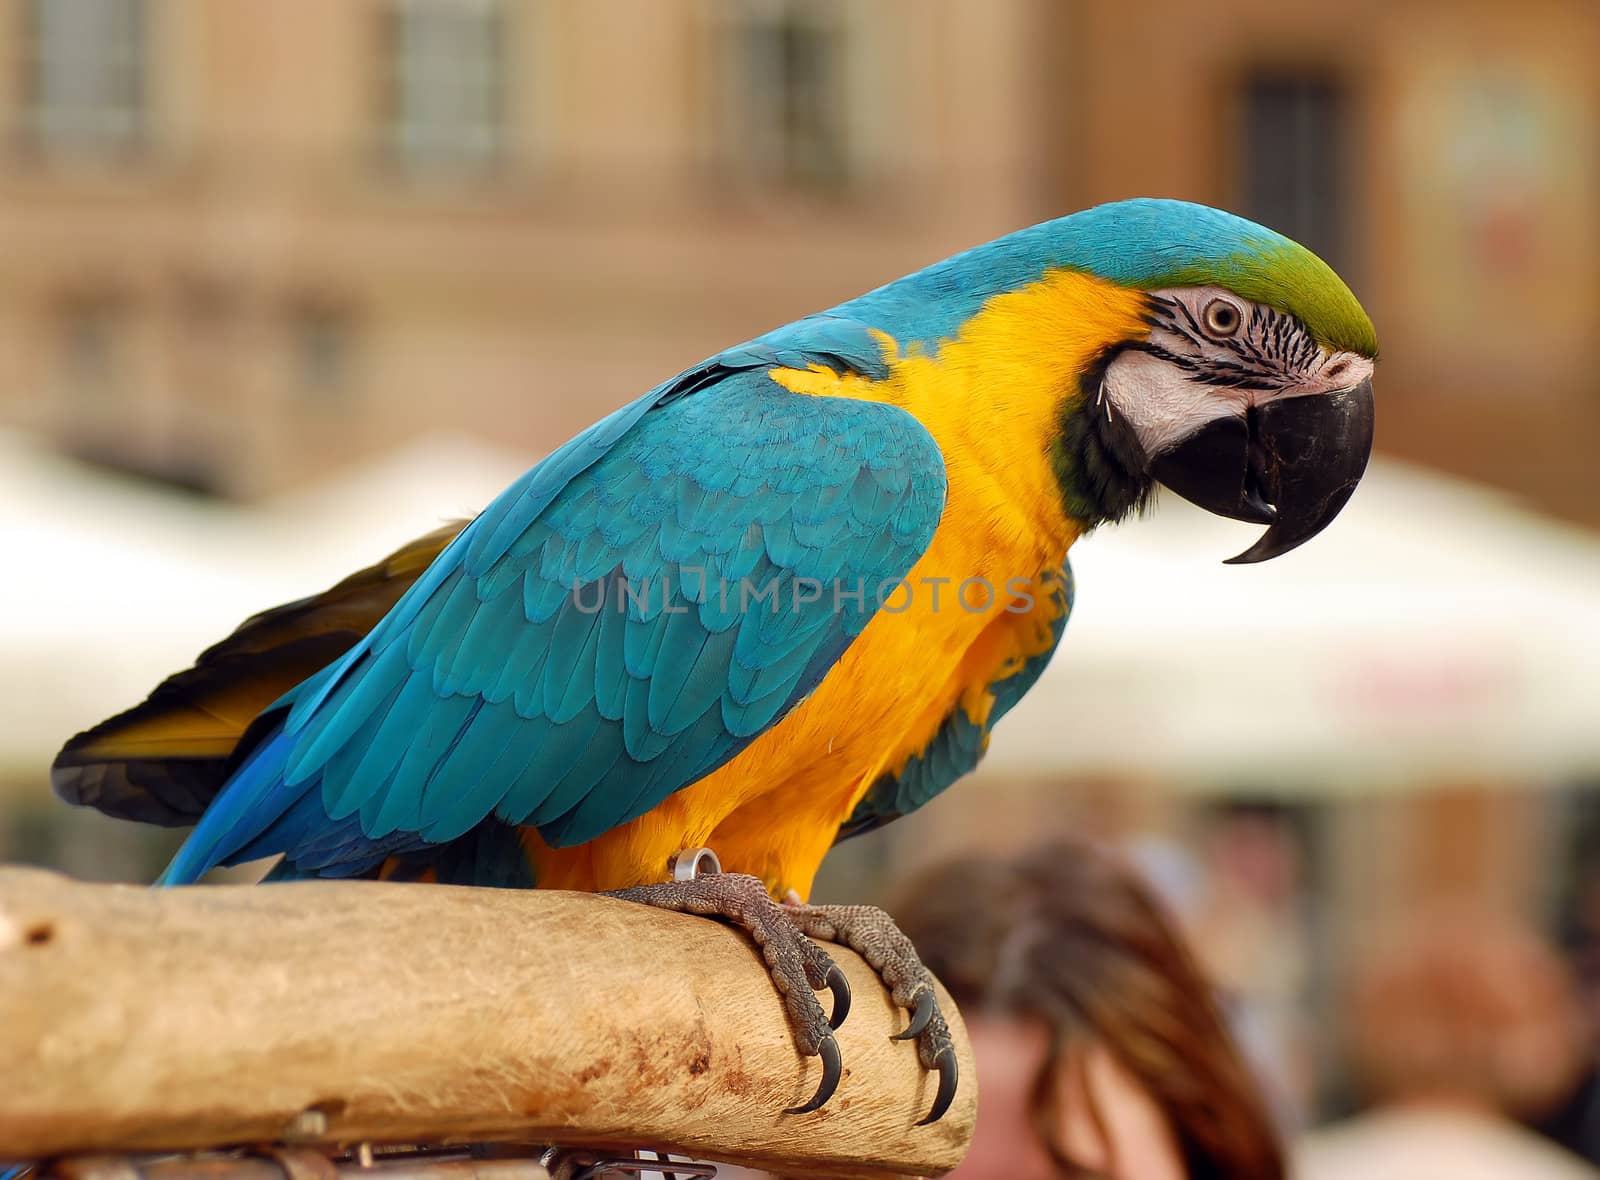 Parrot sitting on wood. Urban background out of focus.